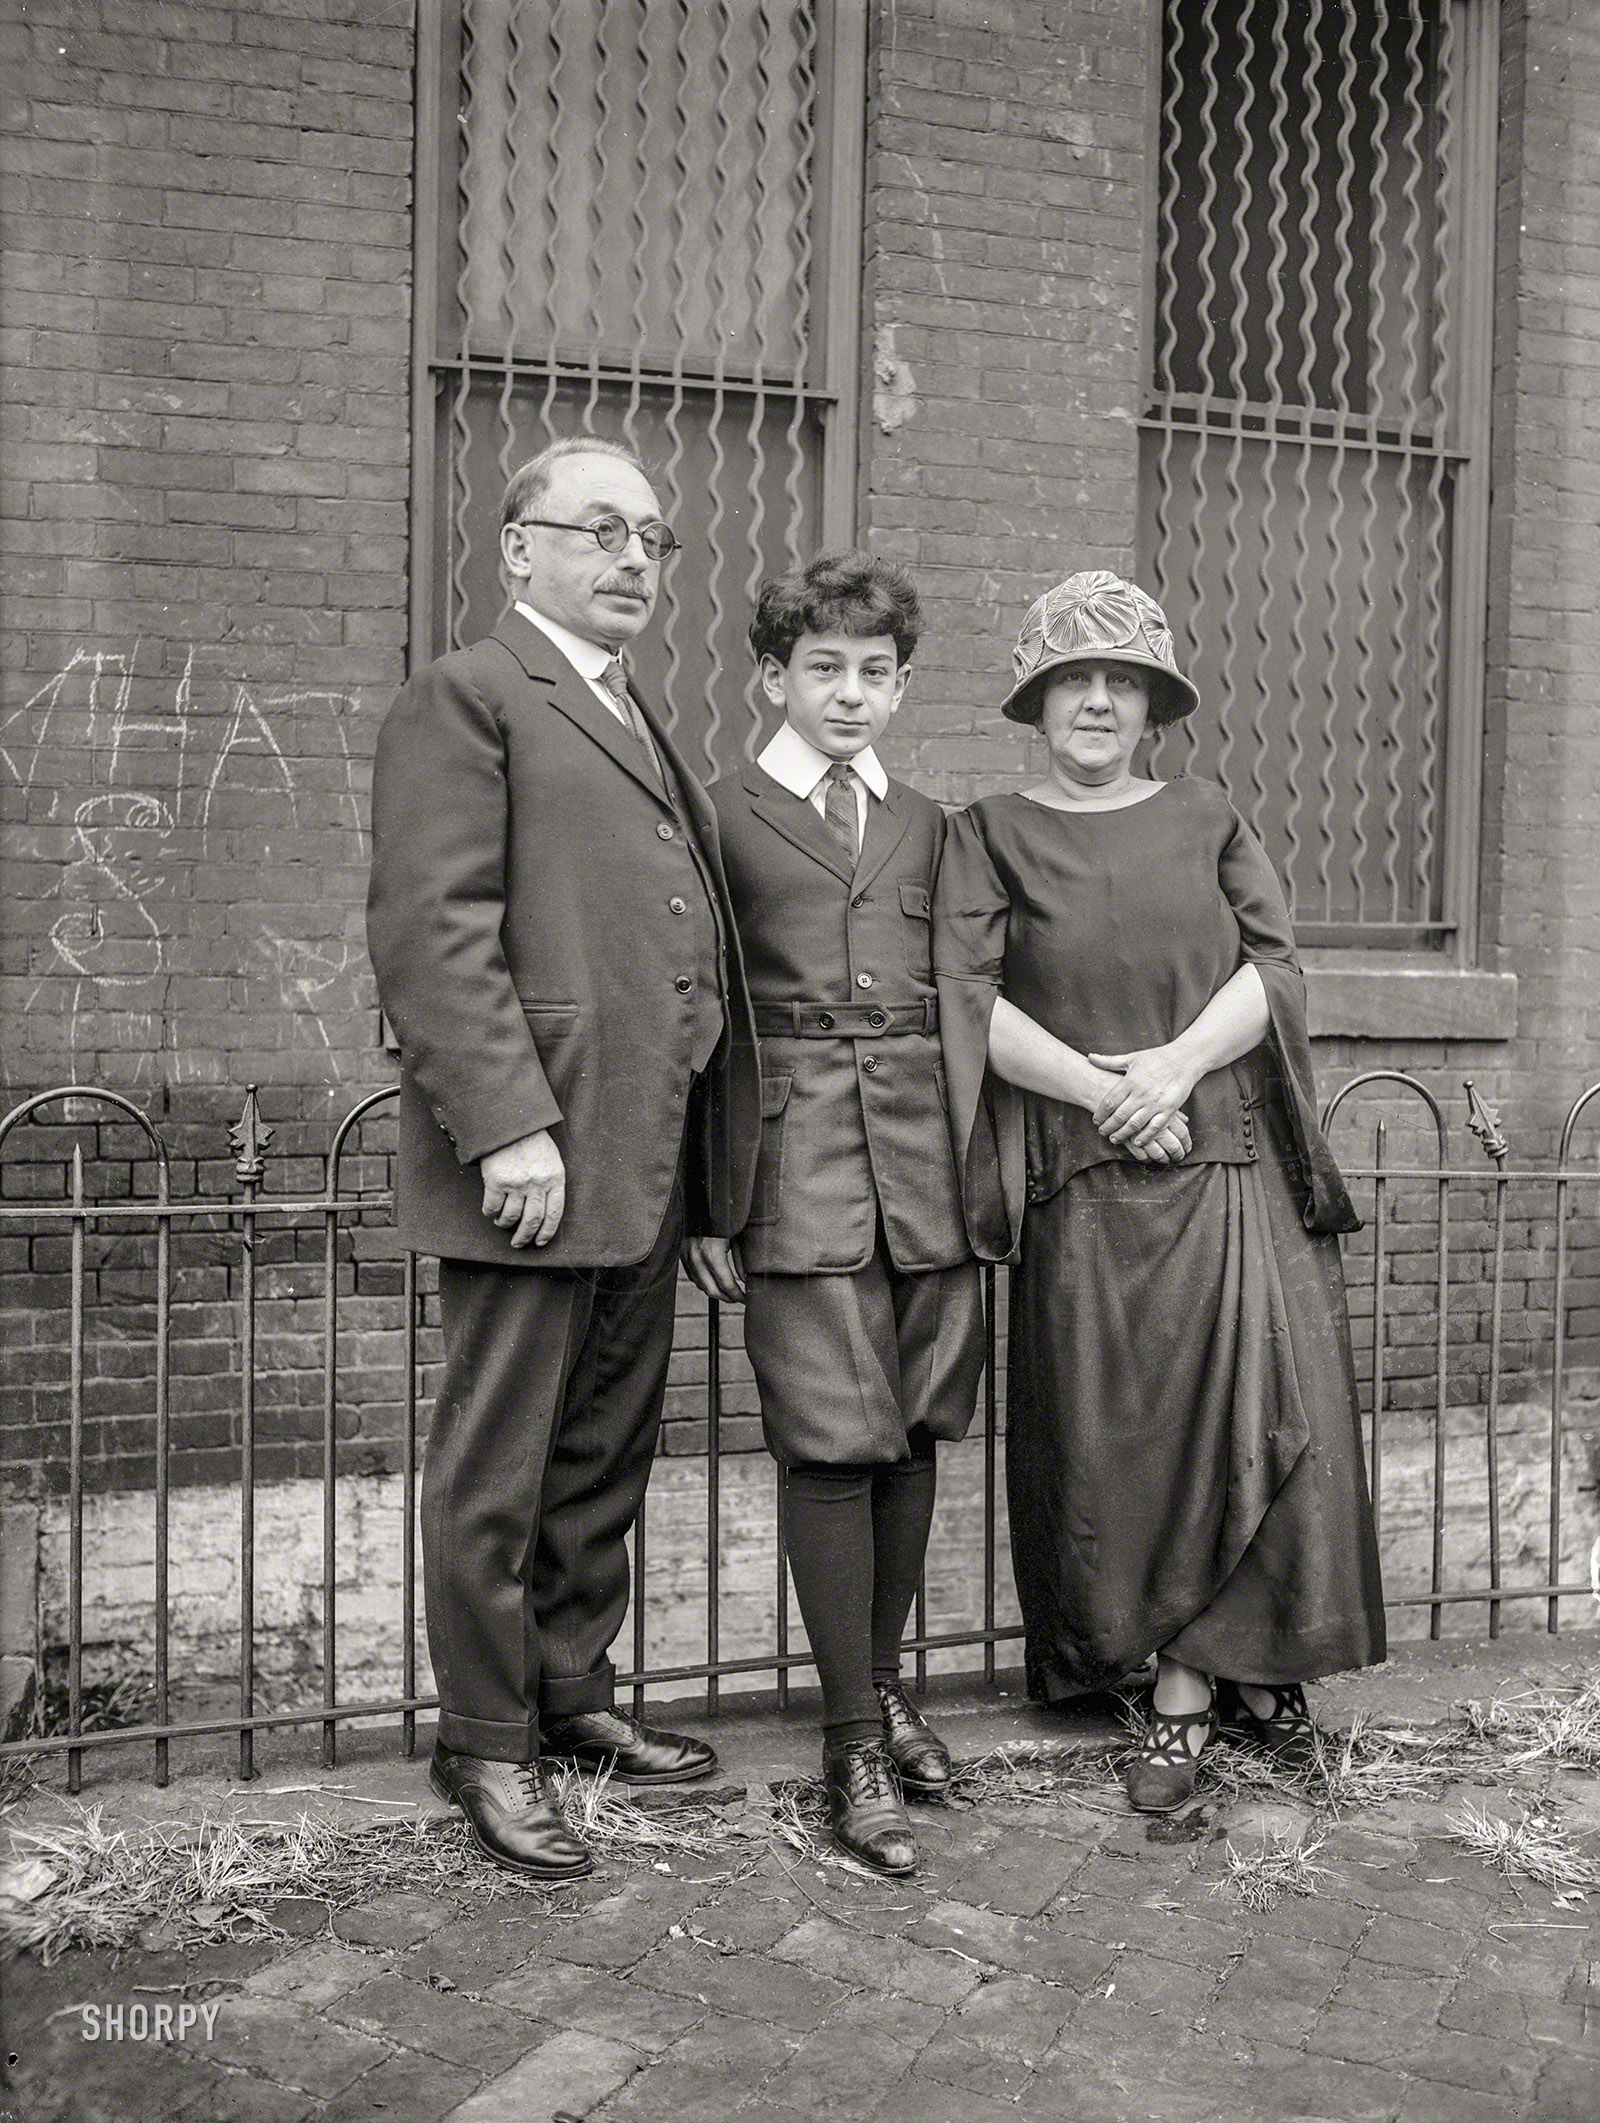 Nov. 16, 1923. Washington, D.C. "Shura Cherkassky, father Isaac & mother Lydia." The Russian-born piano prodigy at the age of 14.  National Photo Company Collection glass negative. View full size.